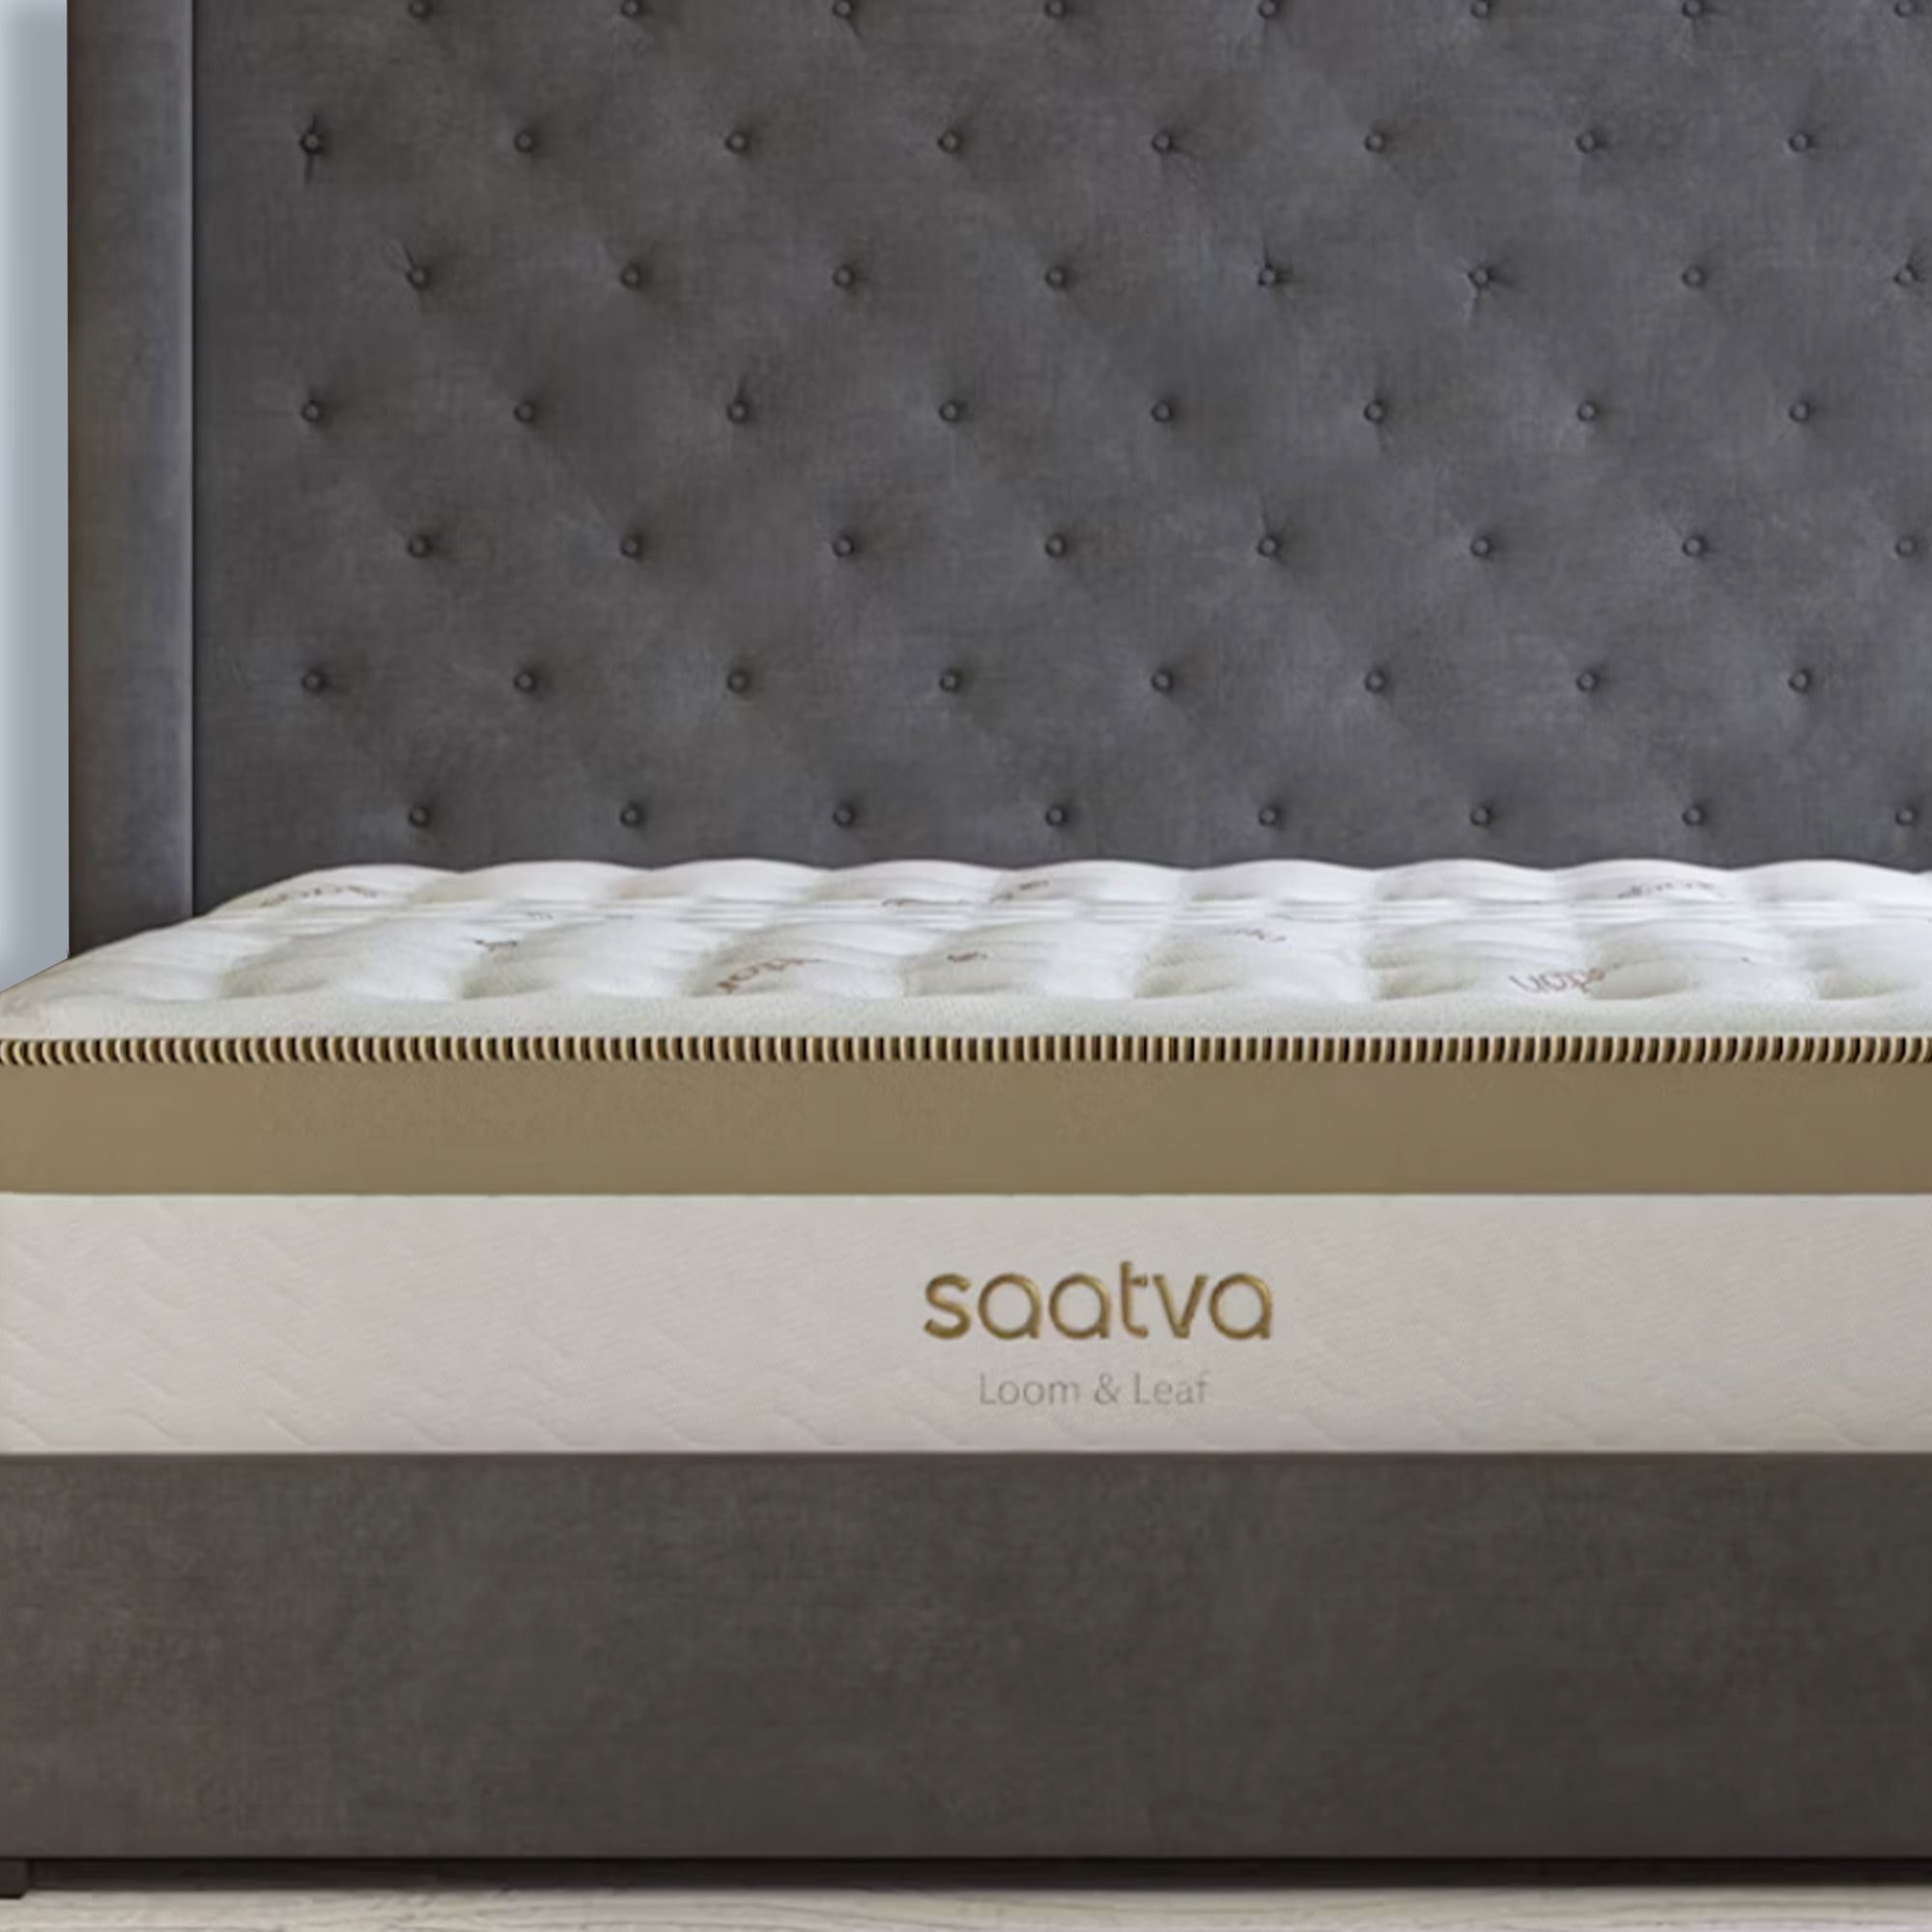 Saatva Mattresses Are Already on Sale for Memorial Day